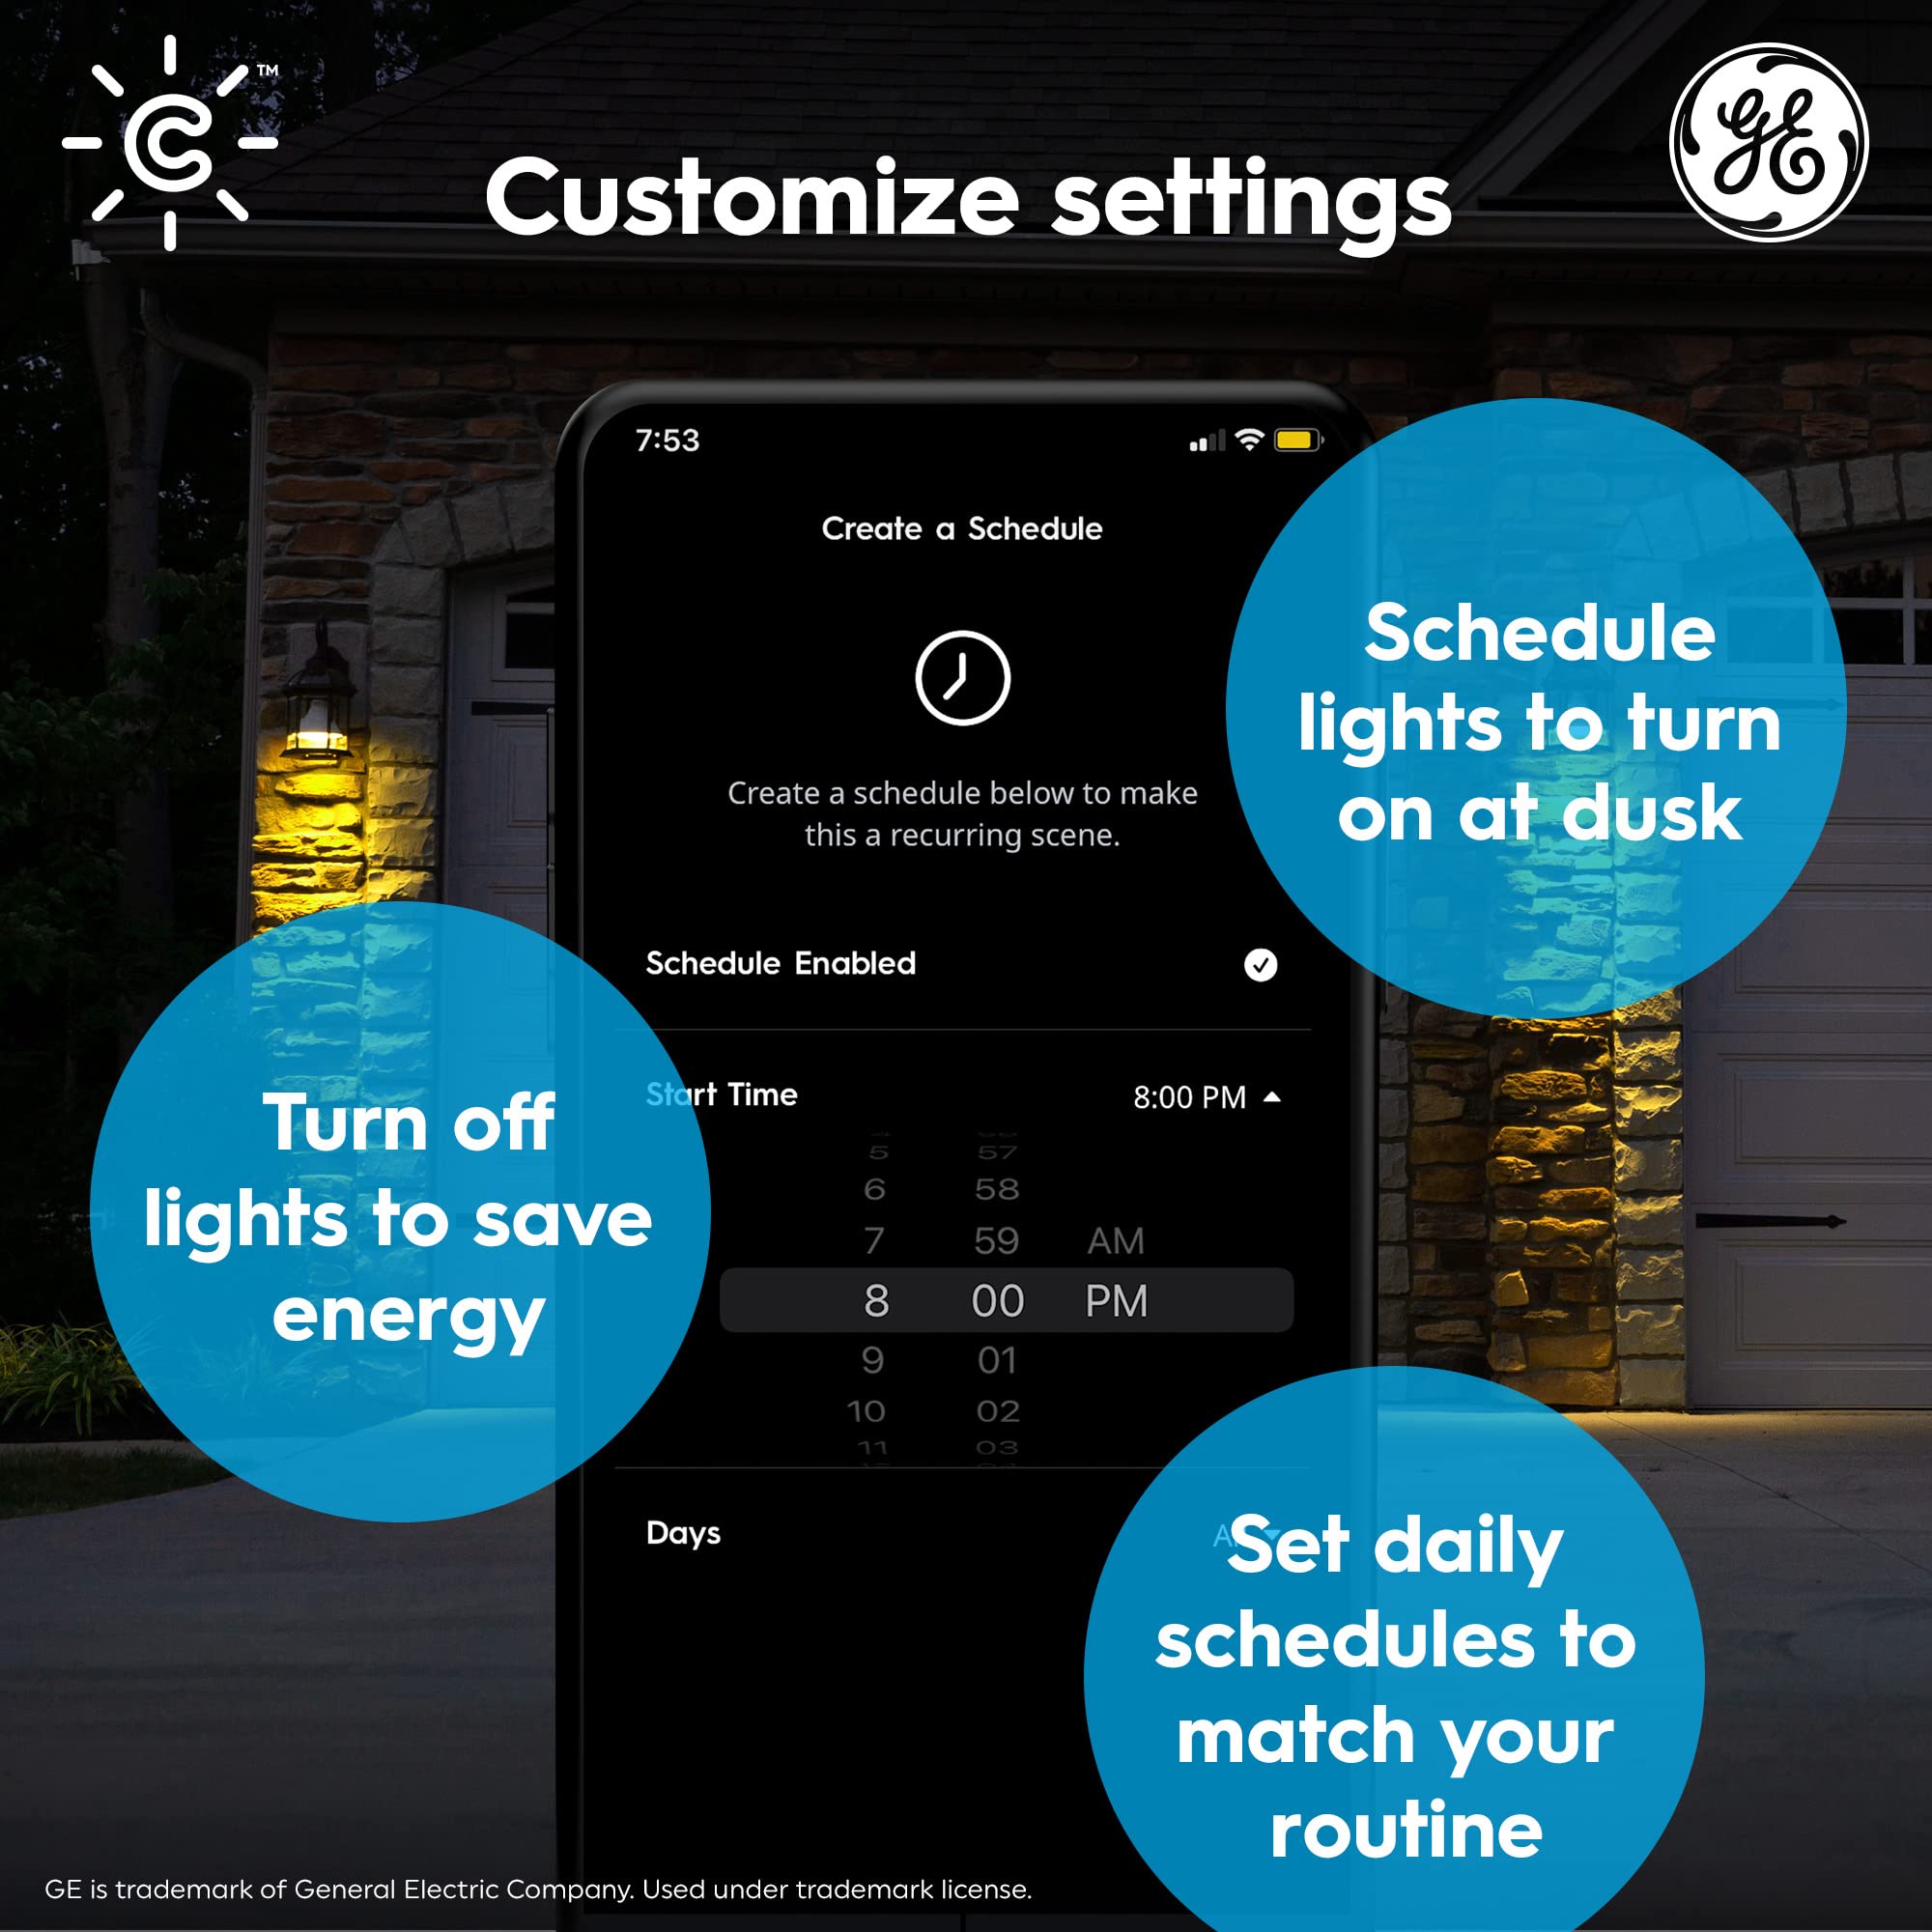 GE Lighting CYNC Smart LED Light Bulbs, Color Changing Lights, Bluetooth and Wi-Fi Lights,Compatible with Alexa and Google Home, PAR38 Outdoor Floodlight Bulbs (Pack of 4)